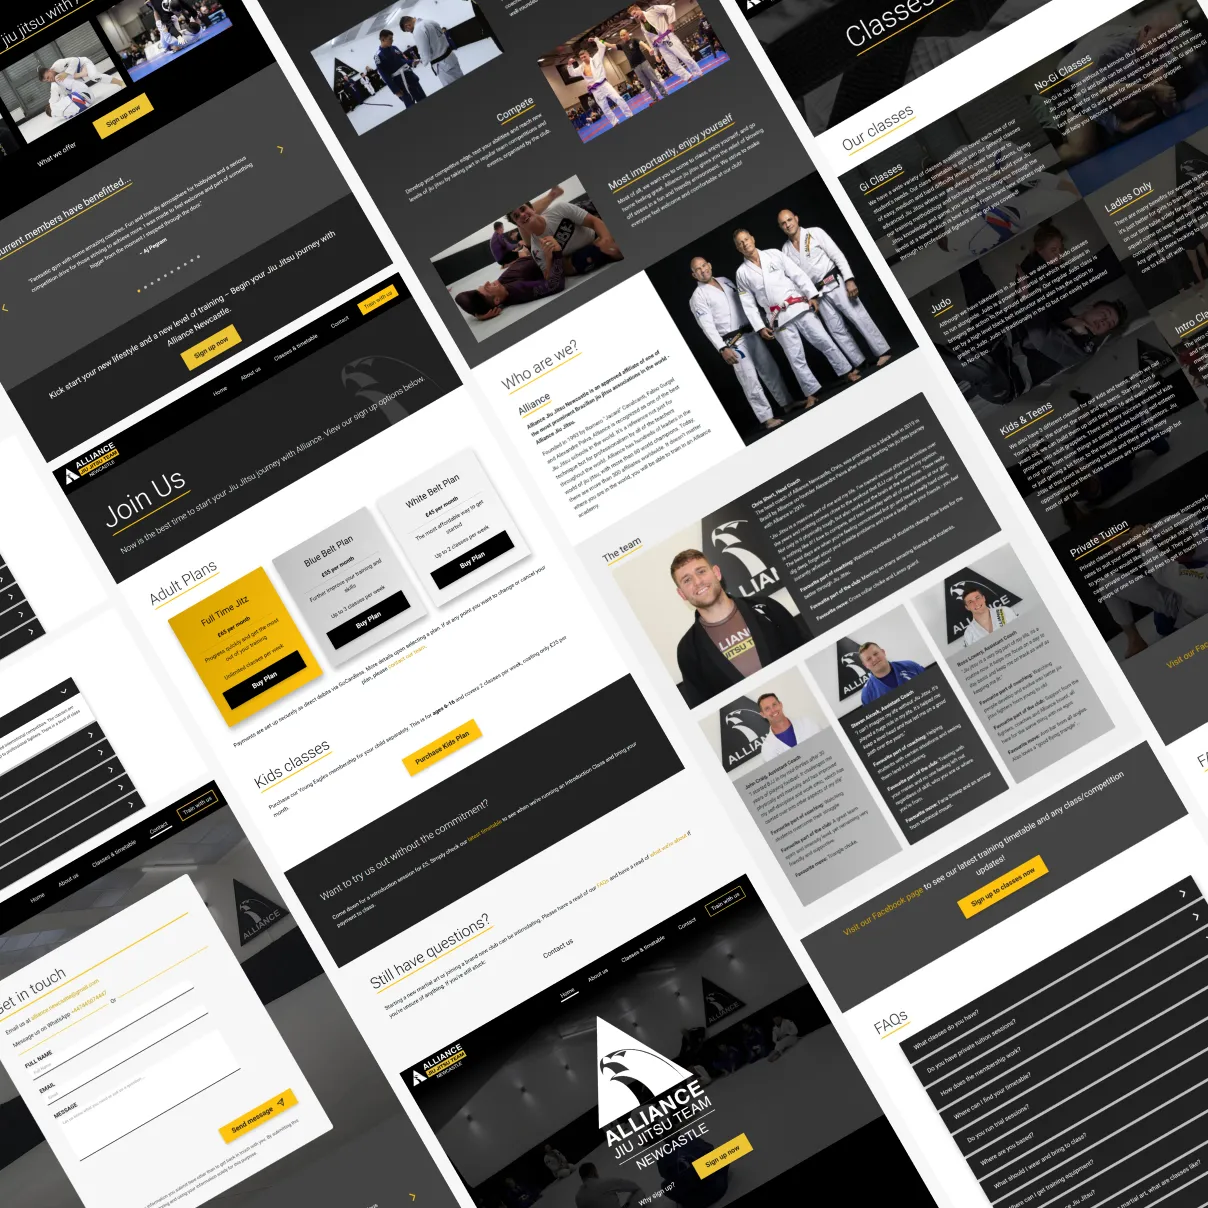 A set of website mockups for the Alliance Jiu Jitsu Newcastle website, showing the homepage, the classes page, sign up page, the contact page and more. Designs are by Lumin web design, development & strategy.